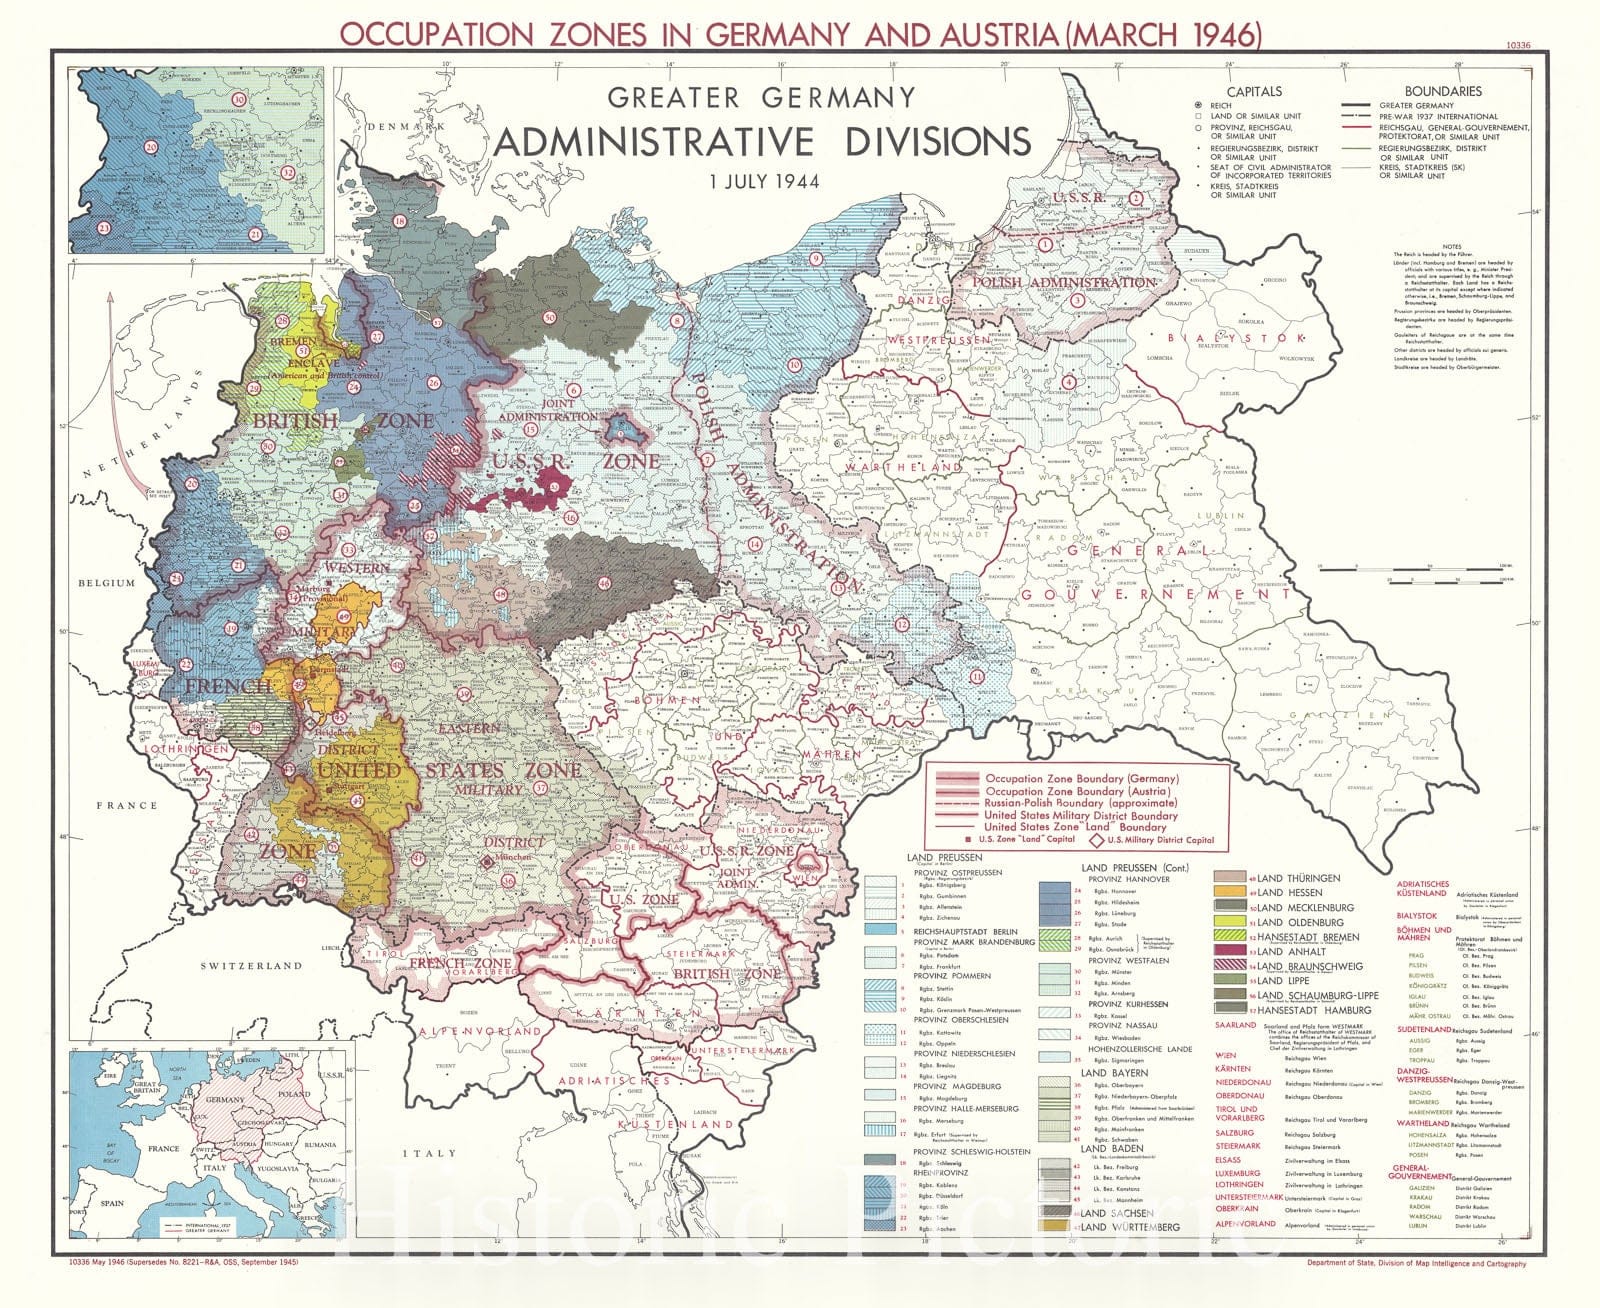 Historic Map : Germany and Austria 1946, Occupation zones in Germany and Austria (March 1946) : Greater Germany Administrative Divisions 1 July 1944 , Antique Vintage Reproduction